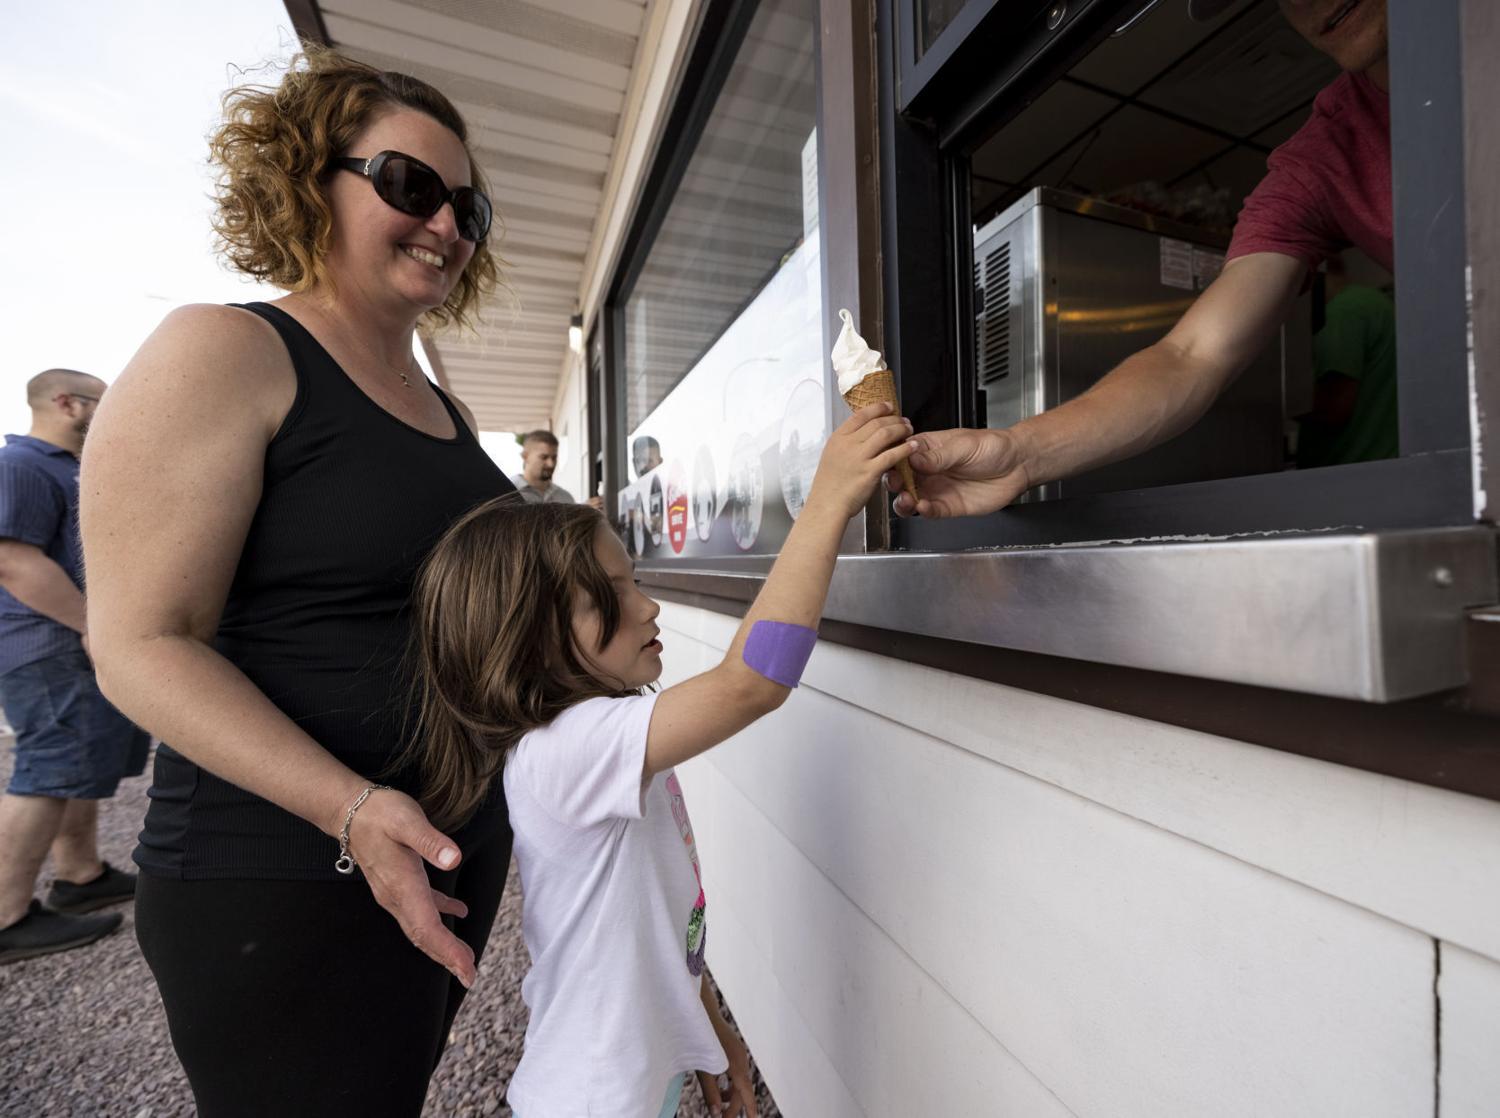 Le Mars' Ice Cream Days has something for everyone